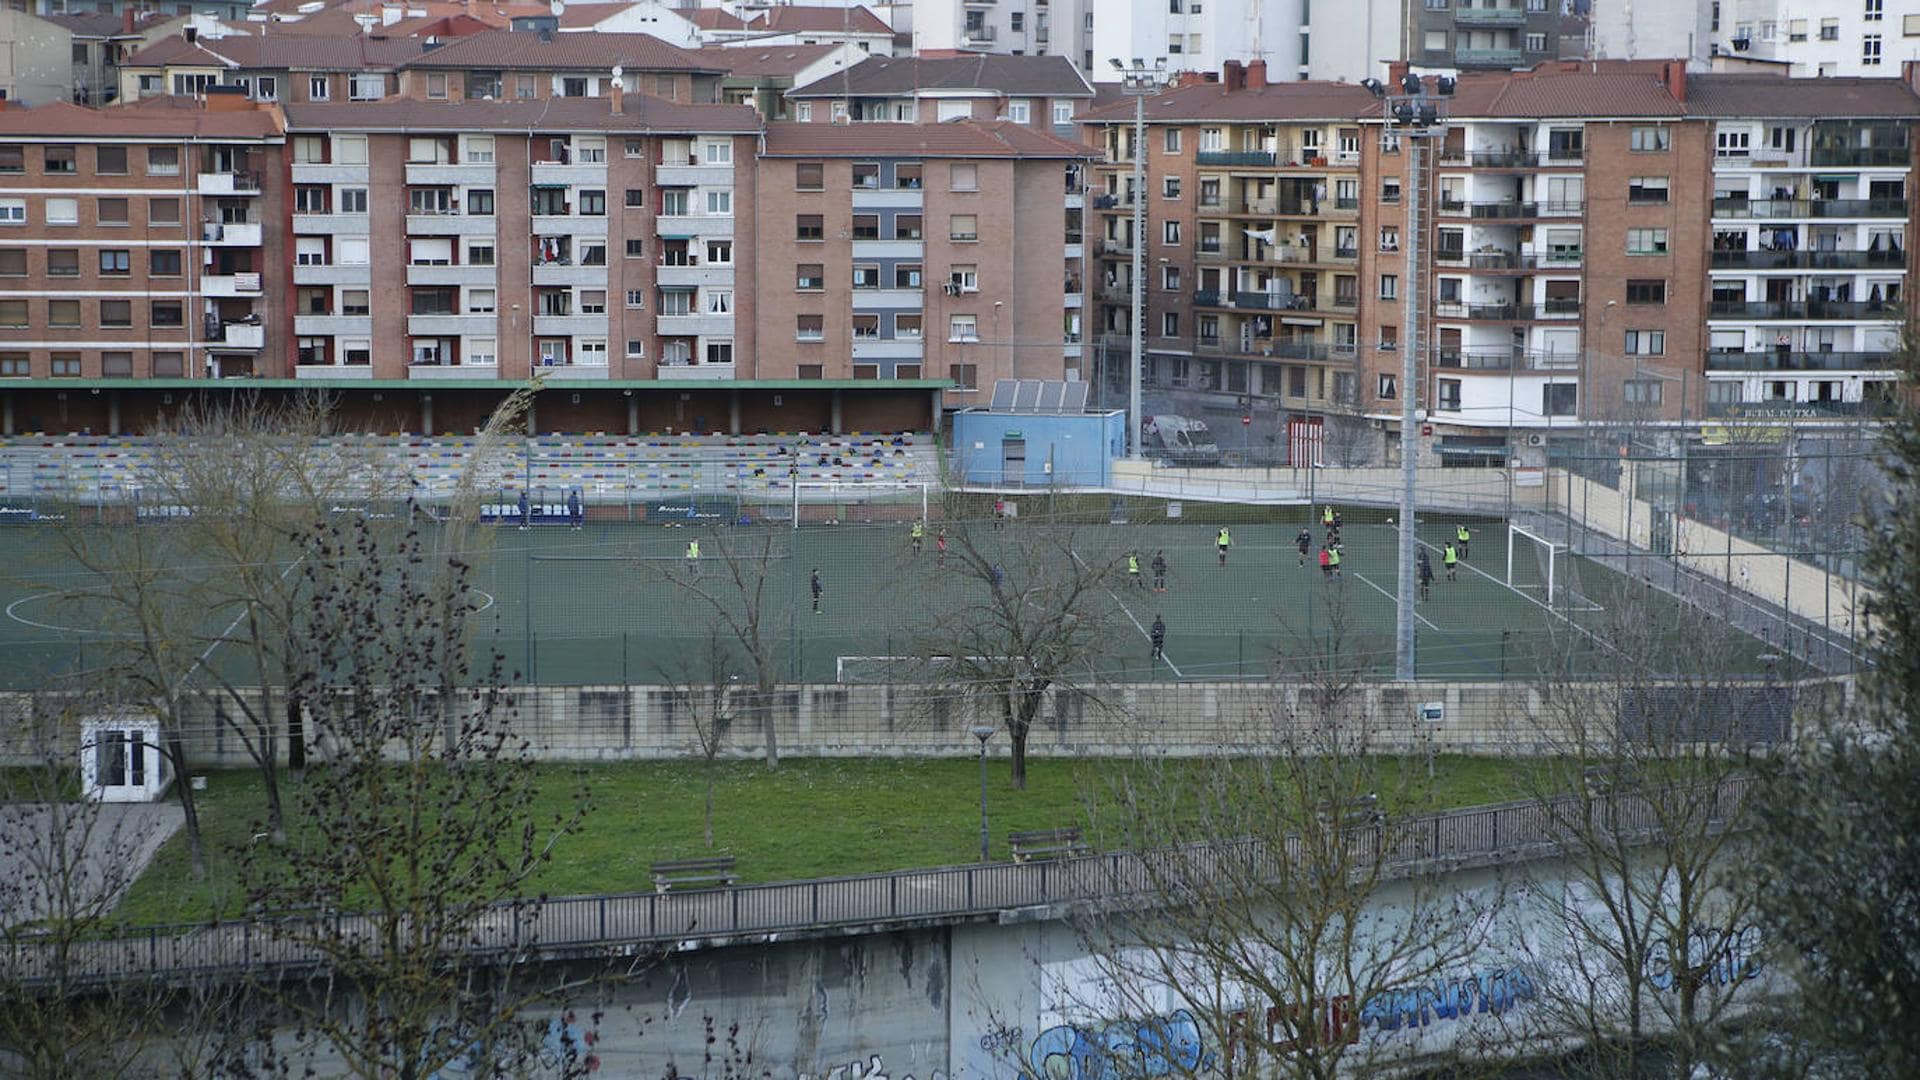 They evacuate the Soloarte field in Basauri due to death threats to the referee